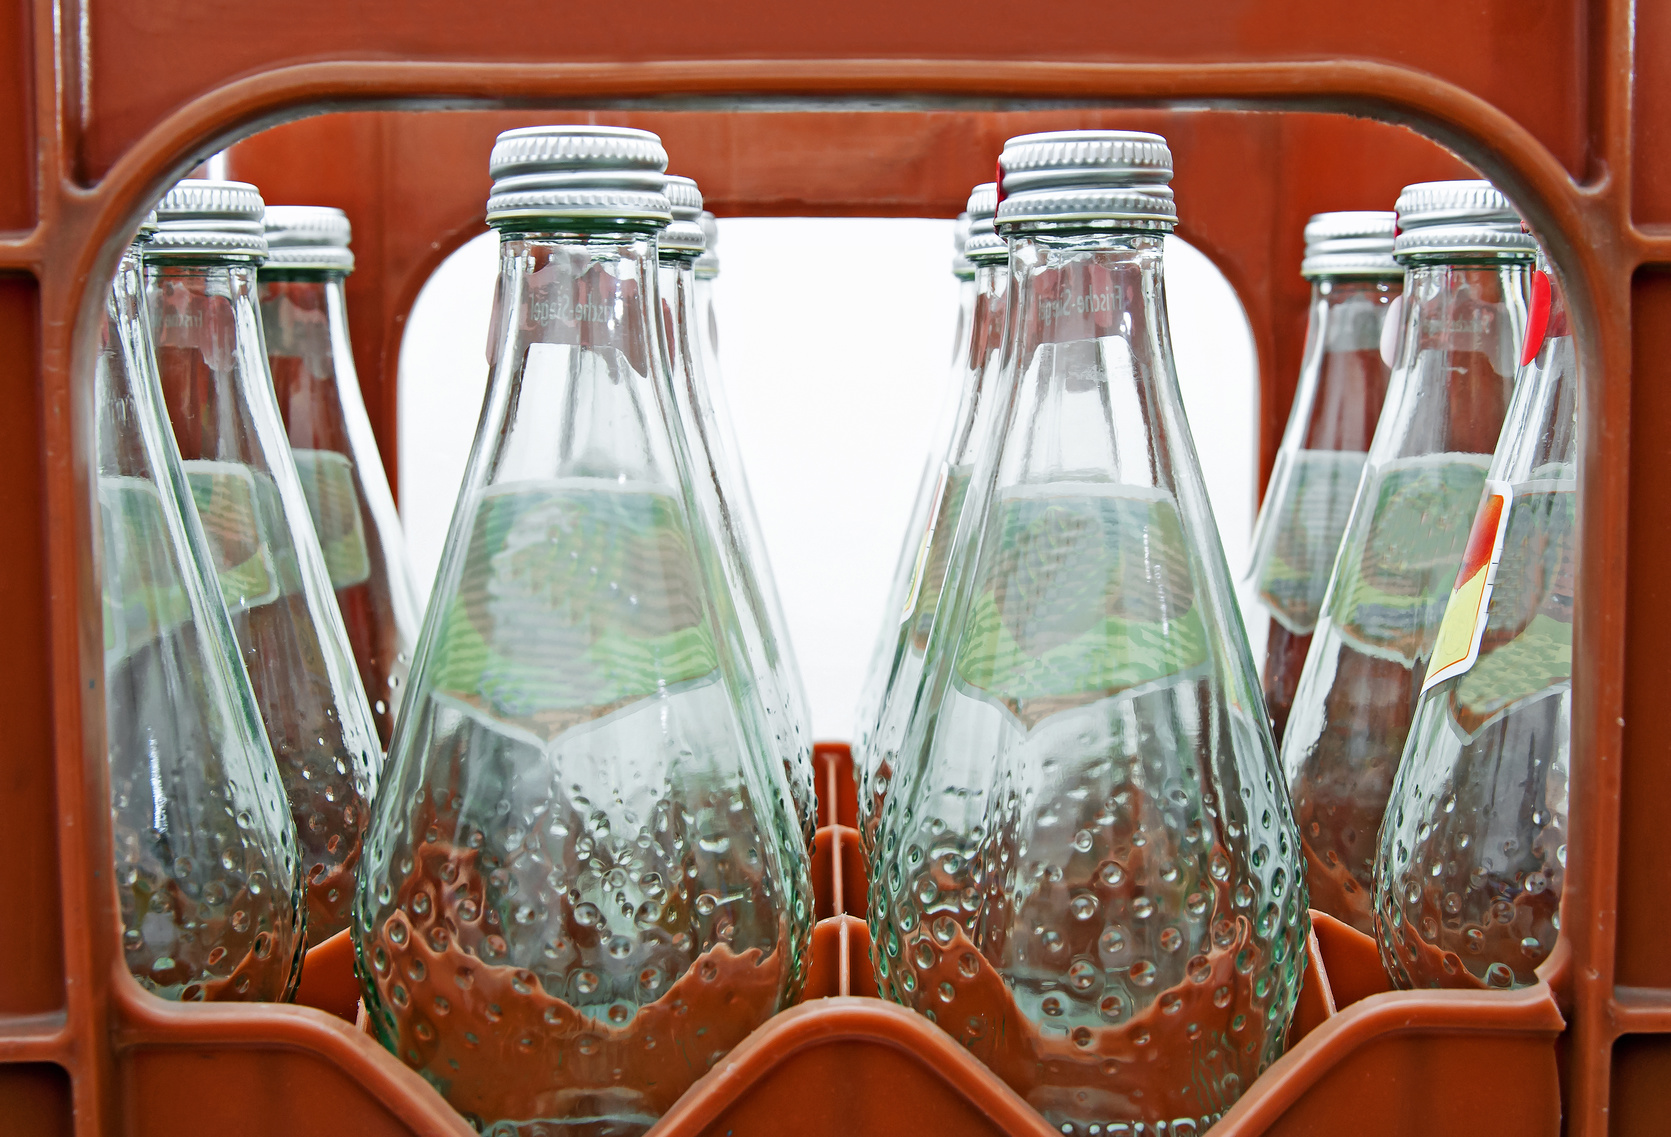 returnable glass bottles with mineral water in a crate